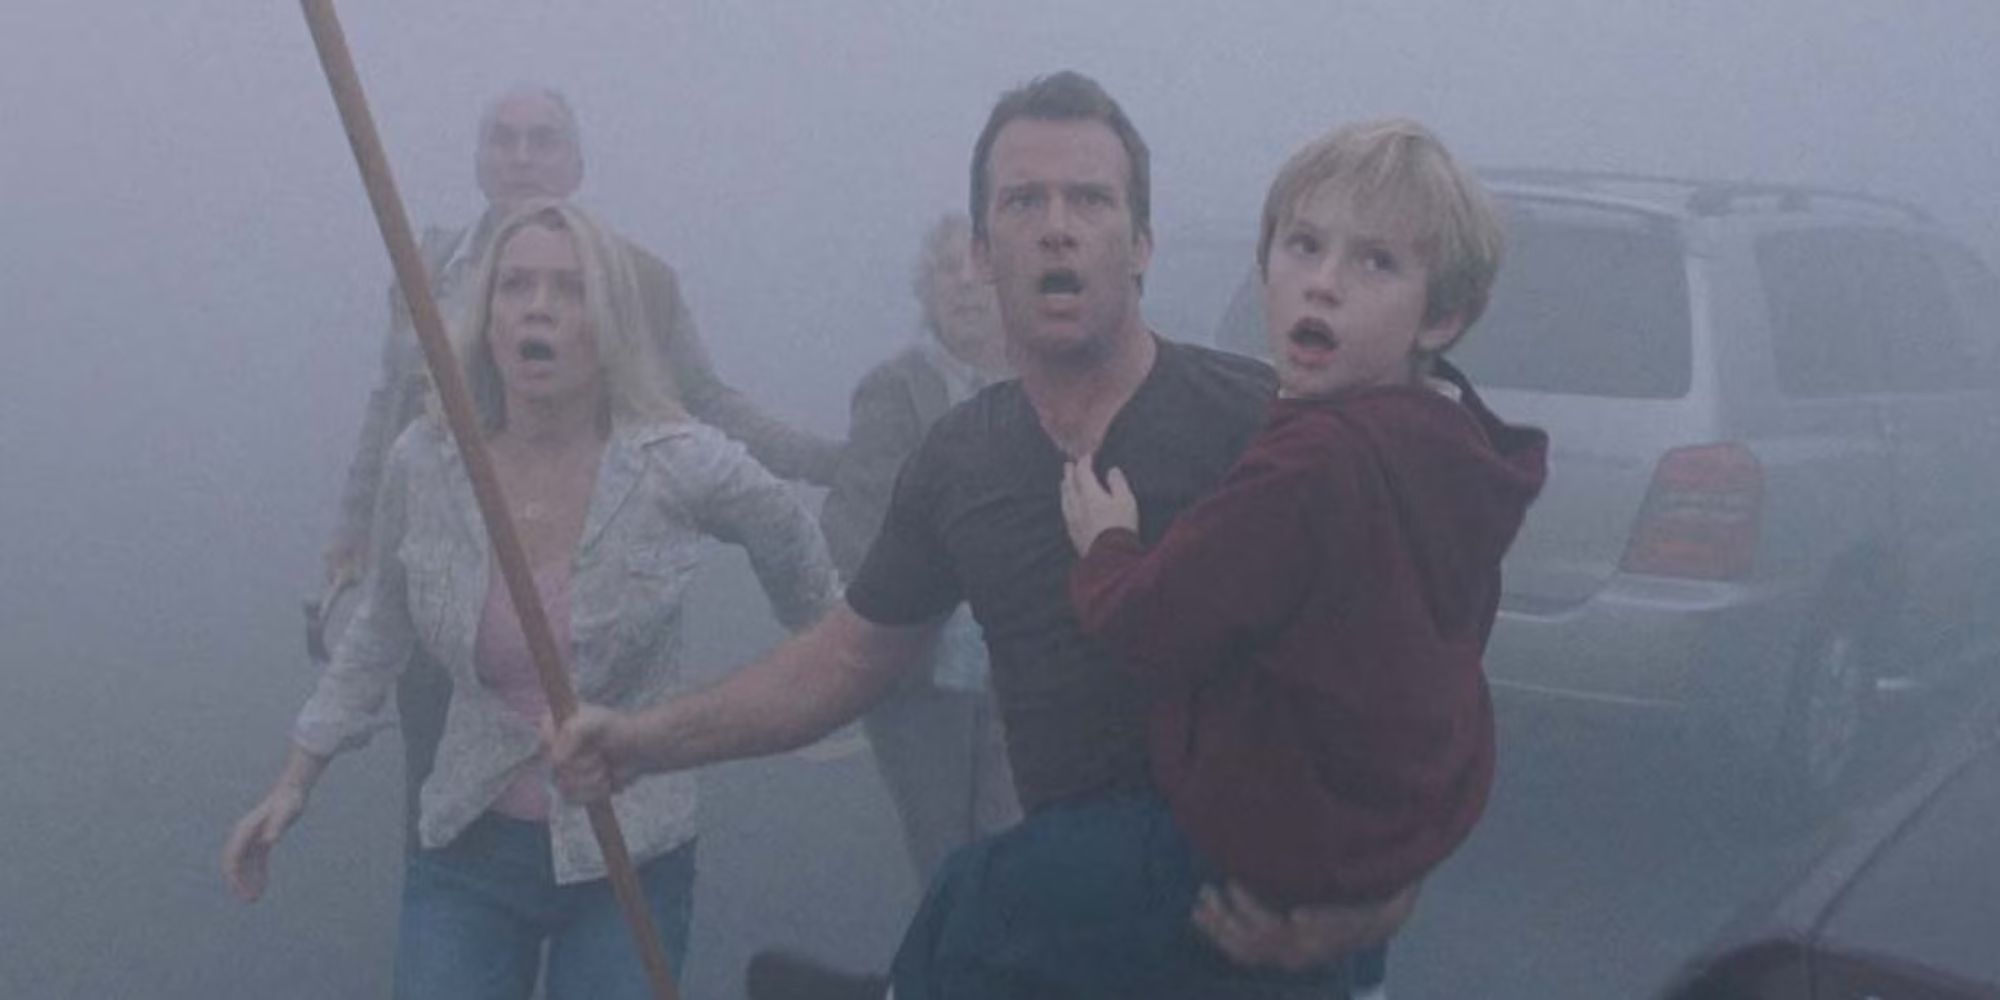 A man carries a young boy holding a stick with other survivors in The Mist as they look shocked at something in the distance.